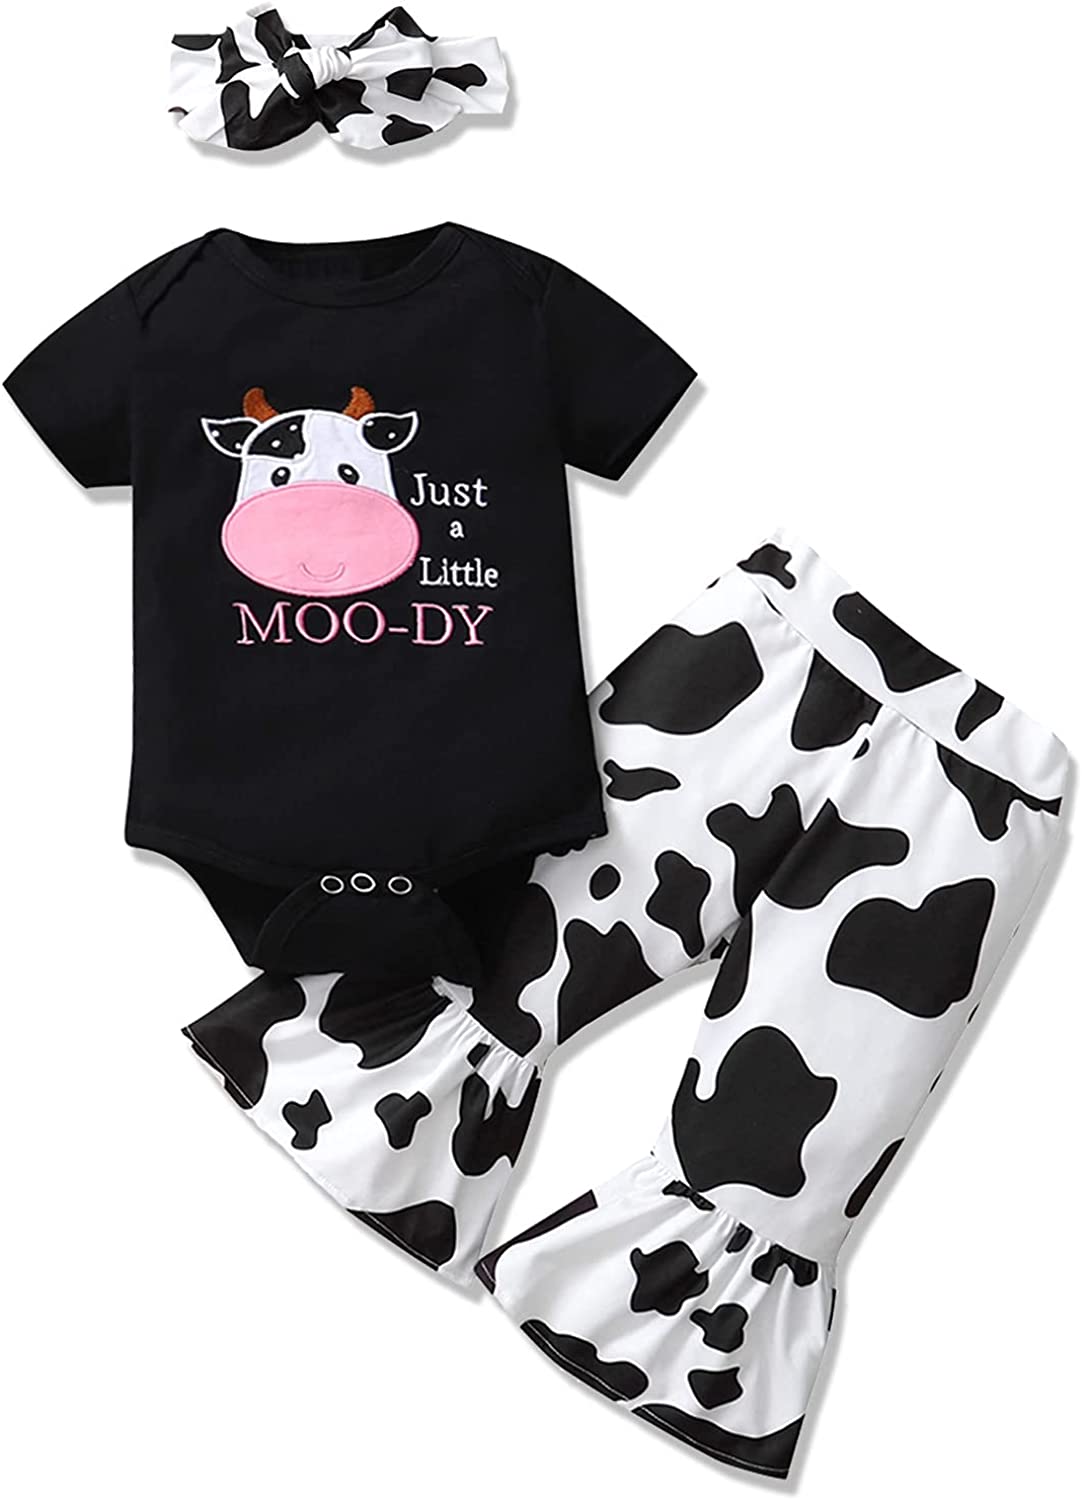 Baby Girl Cow Print Outfit Infant Cow Clothes for Girls Baby Bell Bottom Outfit